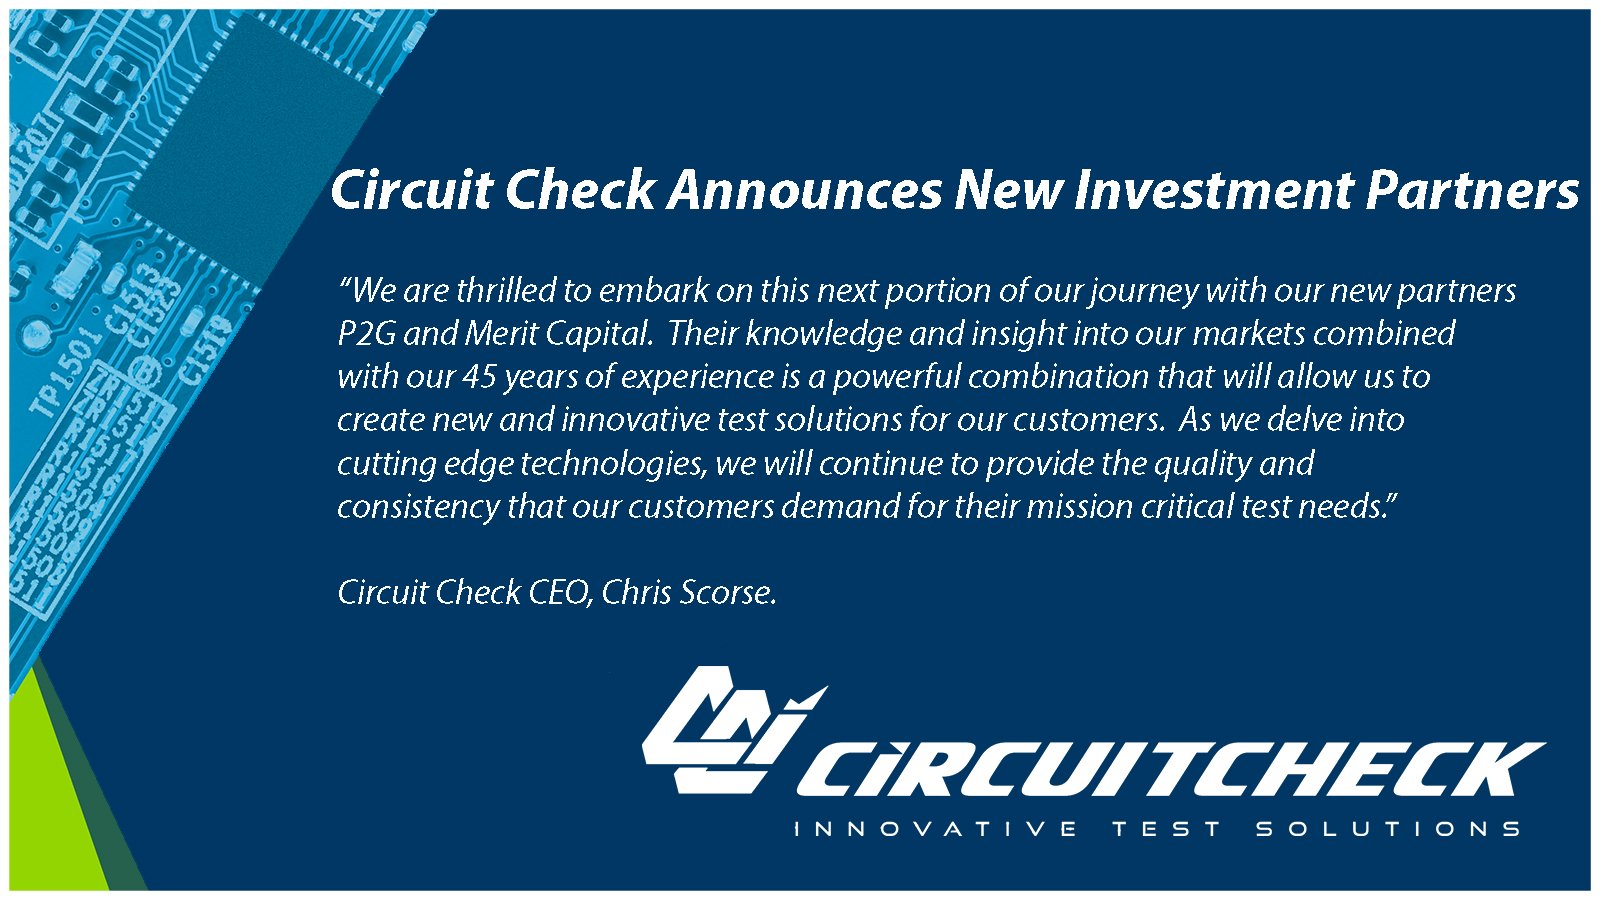 Circuit Check Announces New Investment Partners